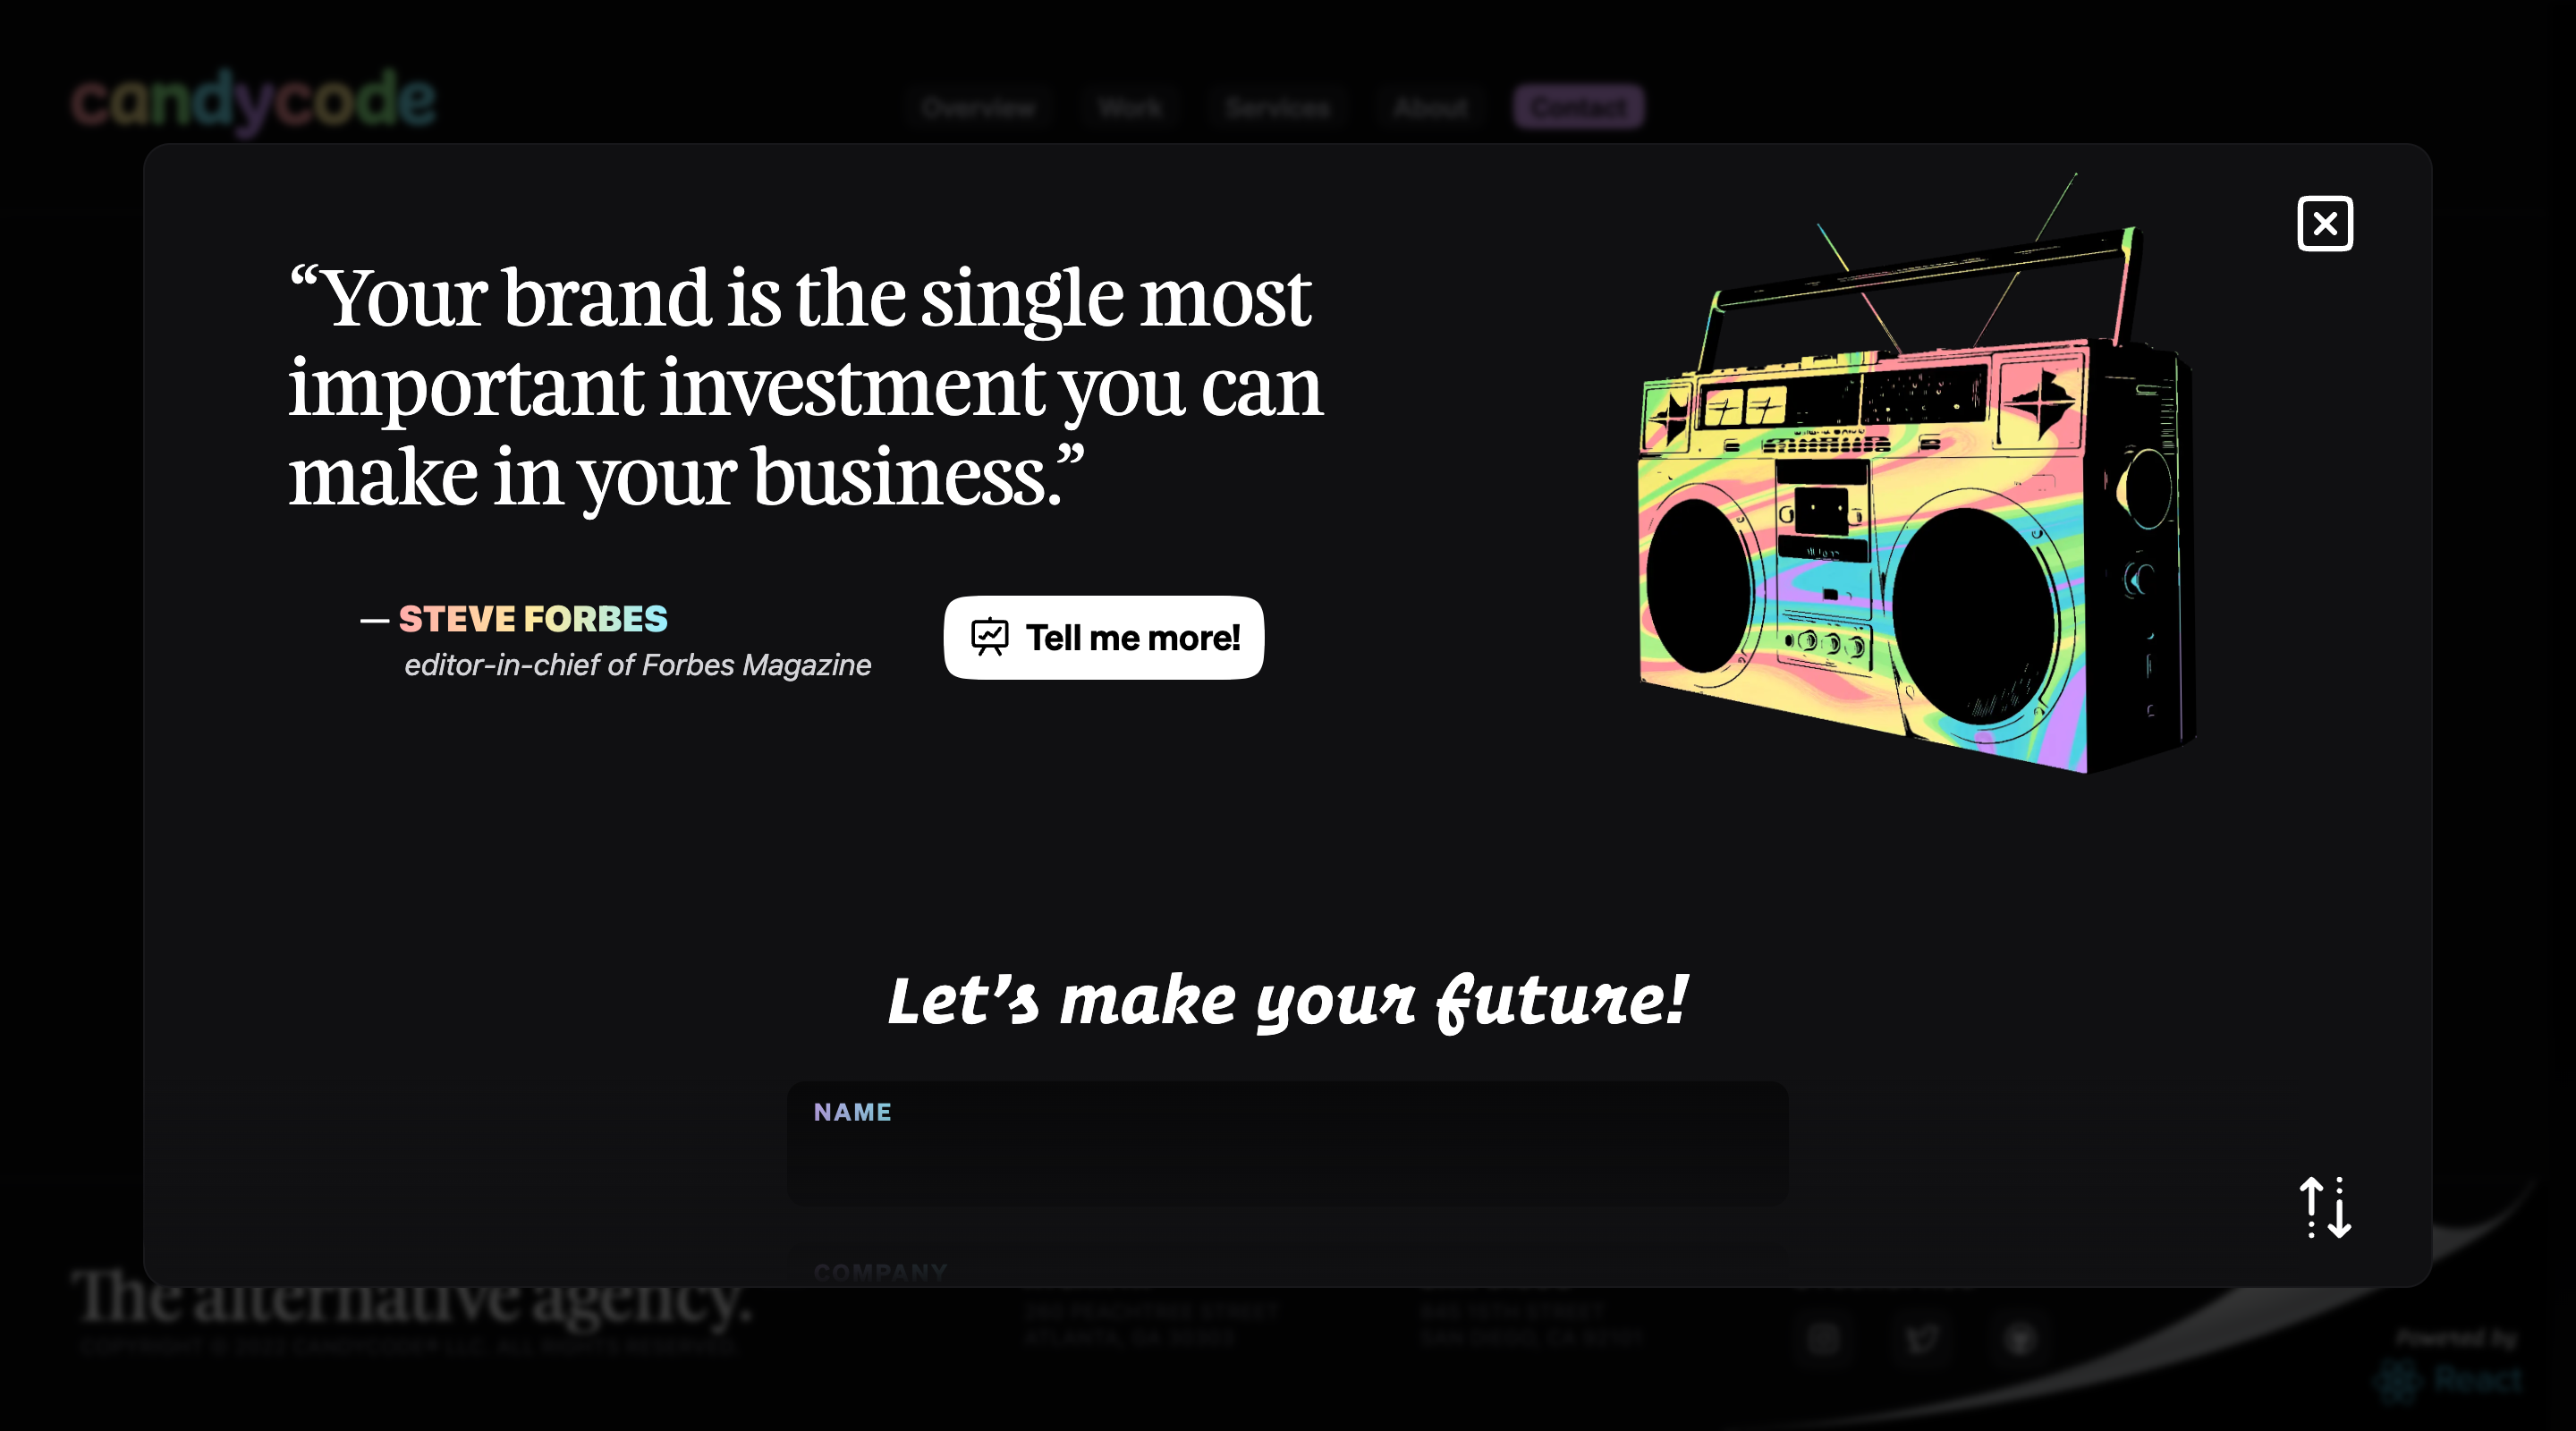 Screenshot of the modal that is triggered by clicking the ”Say hello” button. To the left is a quote by Steve Forbes and a button saying ”Tell me more!”. To the right is an 80s-style cassette player/radio in blue, green, purple, red, and yellow colors. Below is a heading saying ”Let´s make your future!” followed by a contact form, where only the name field is visible in this screenshot.